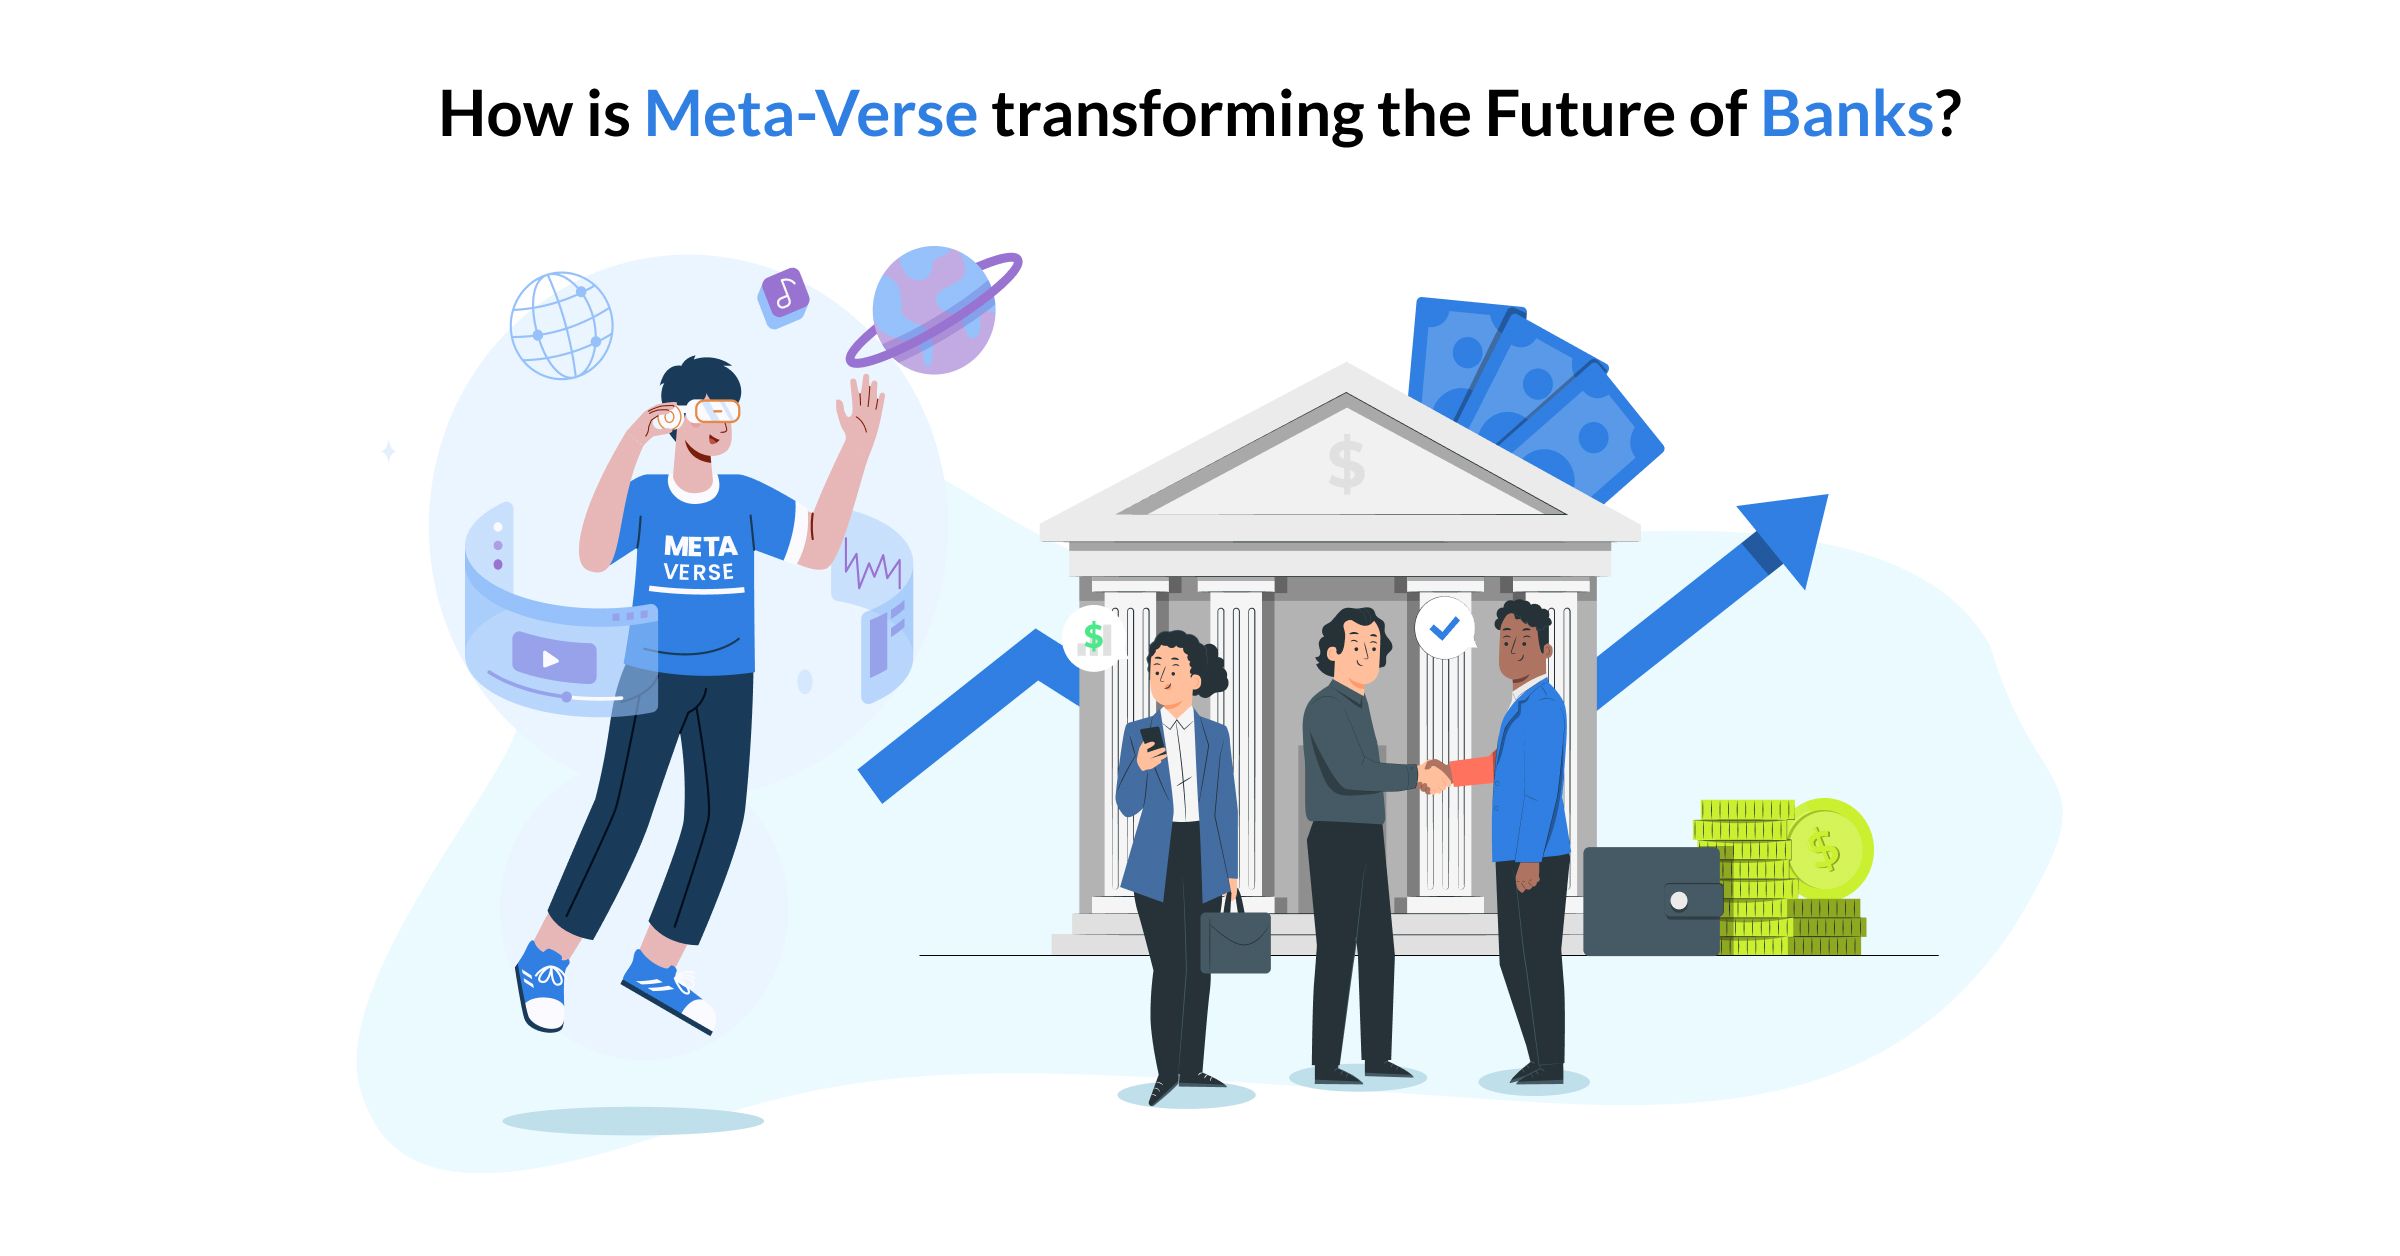 How is metaverse transforming the future of banks?